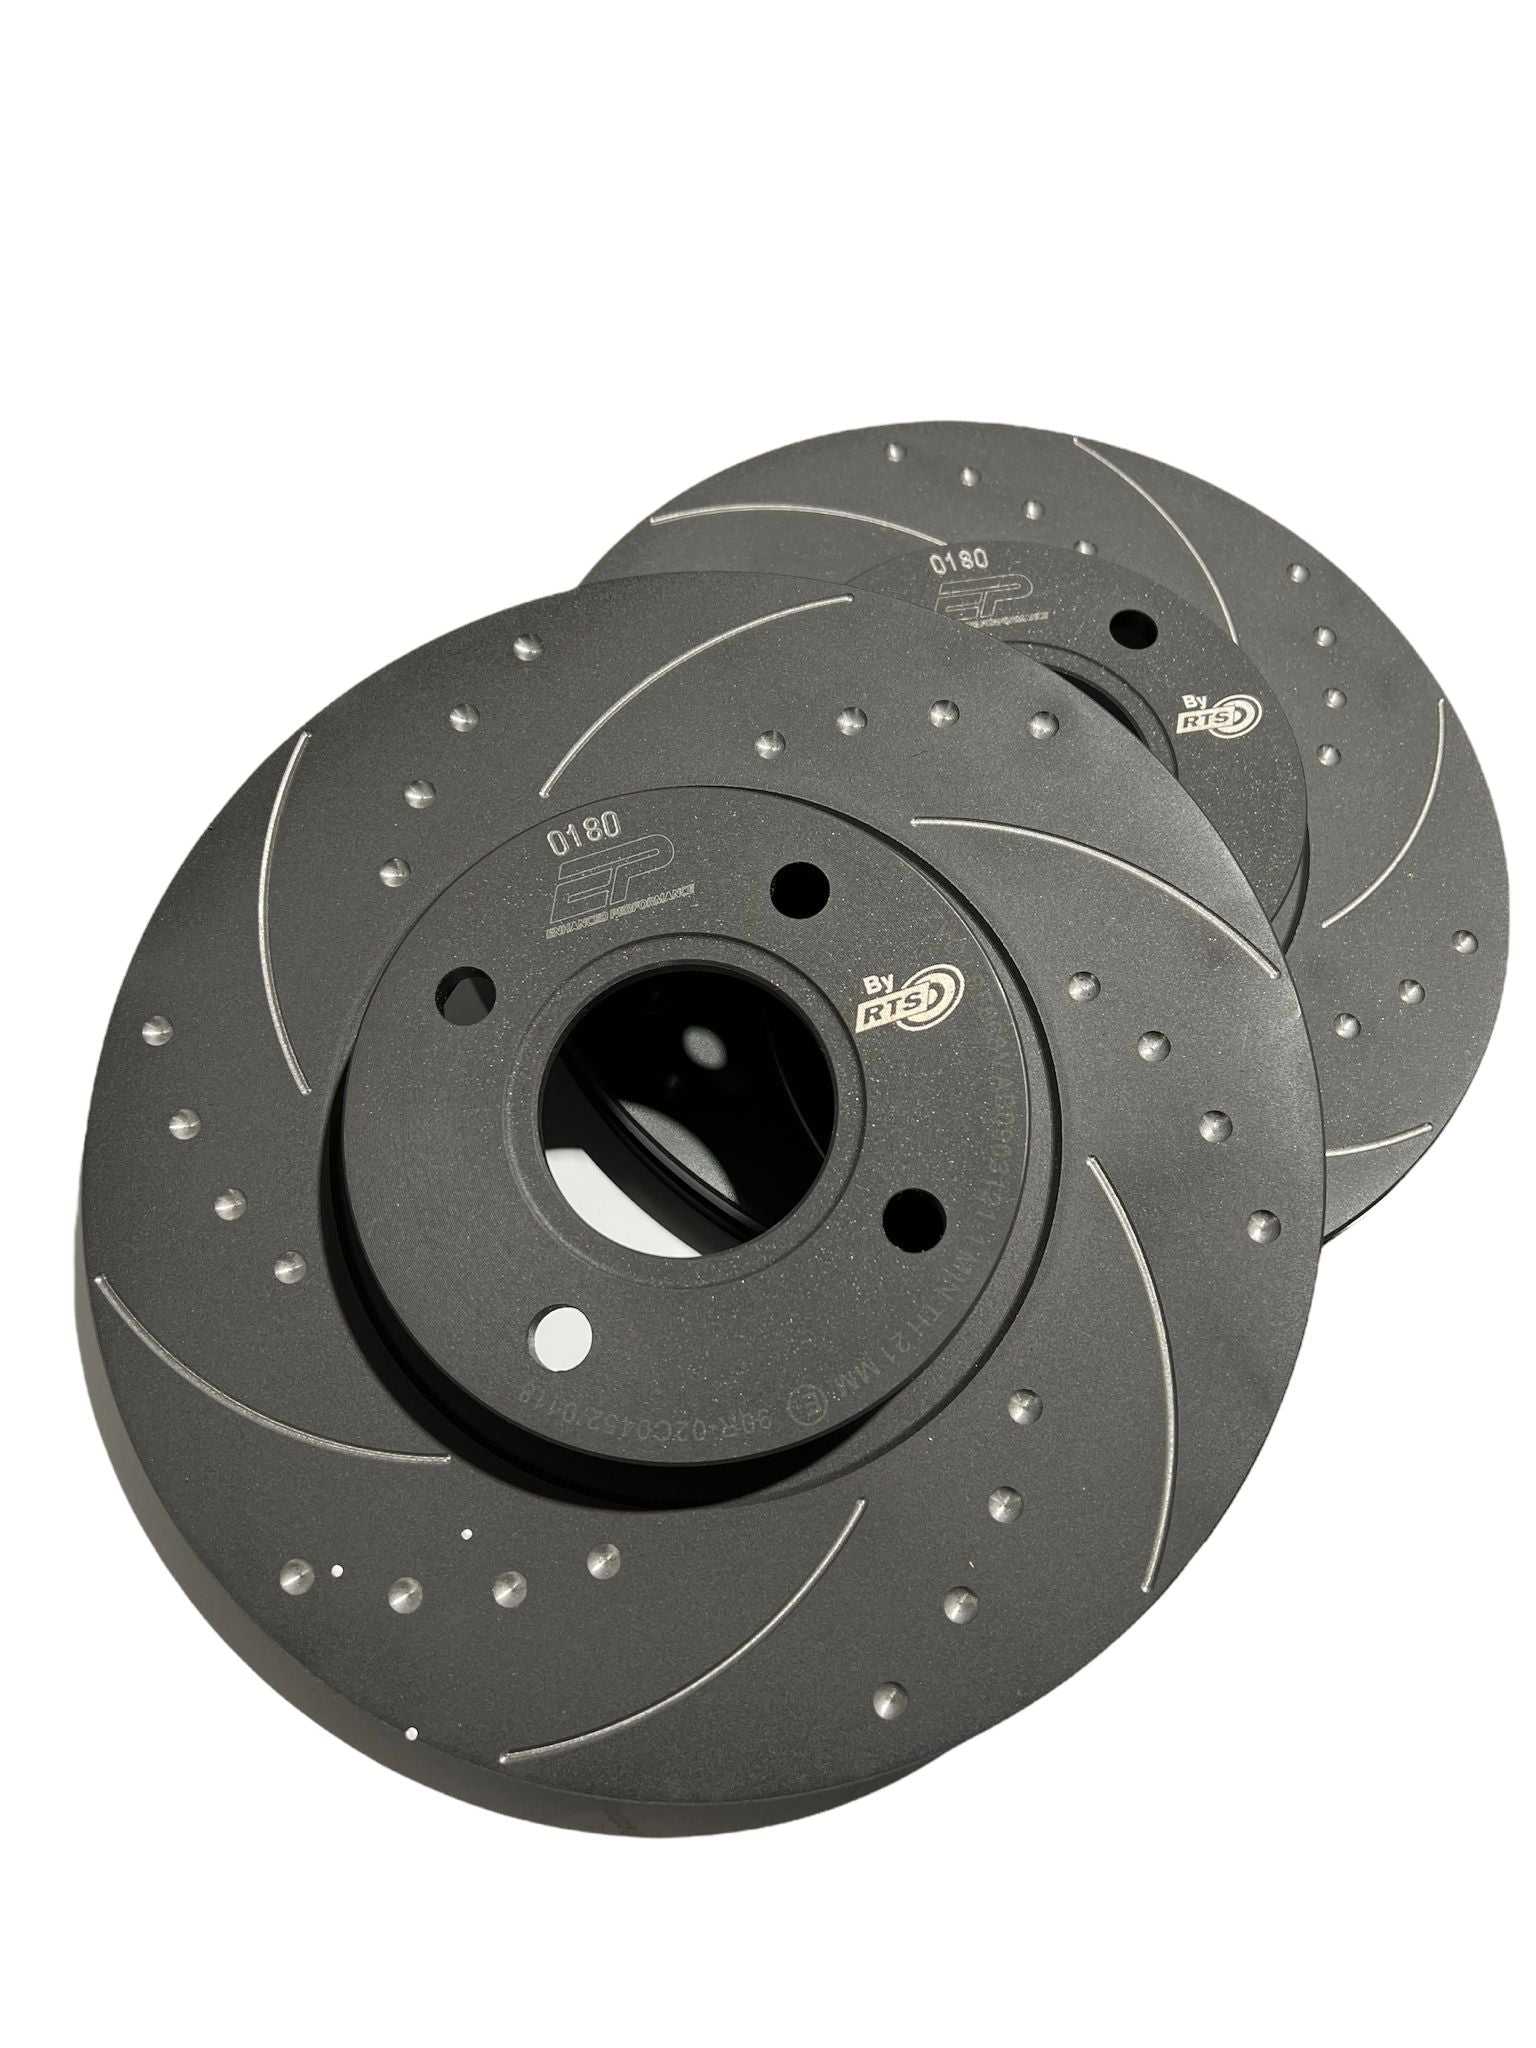 Enhanced Performance, Enhanced Performance (By RTS) Brake Disc Upgrade - MK7 1.0 EcoBoost - Dimpled & Grooved